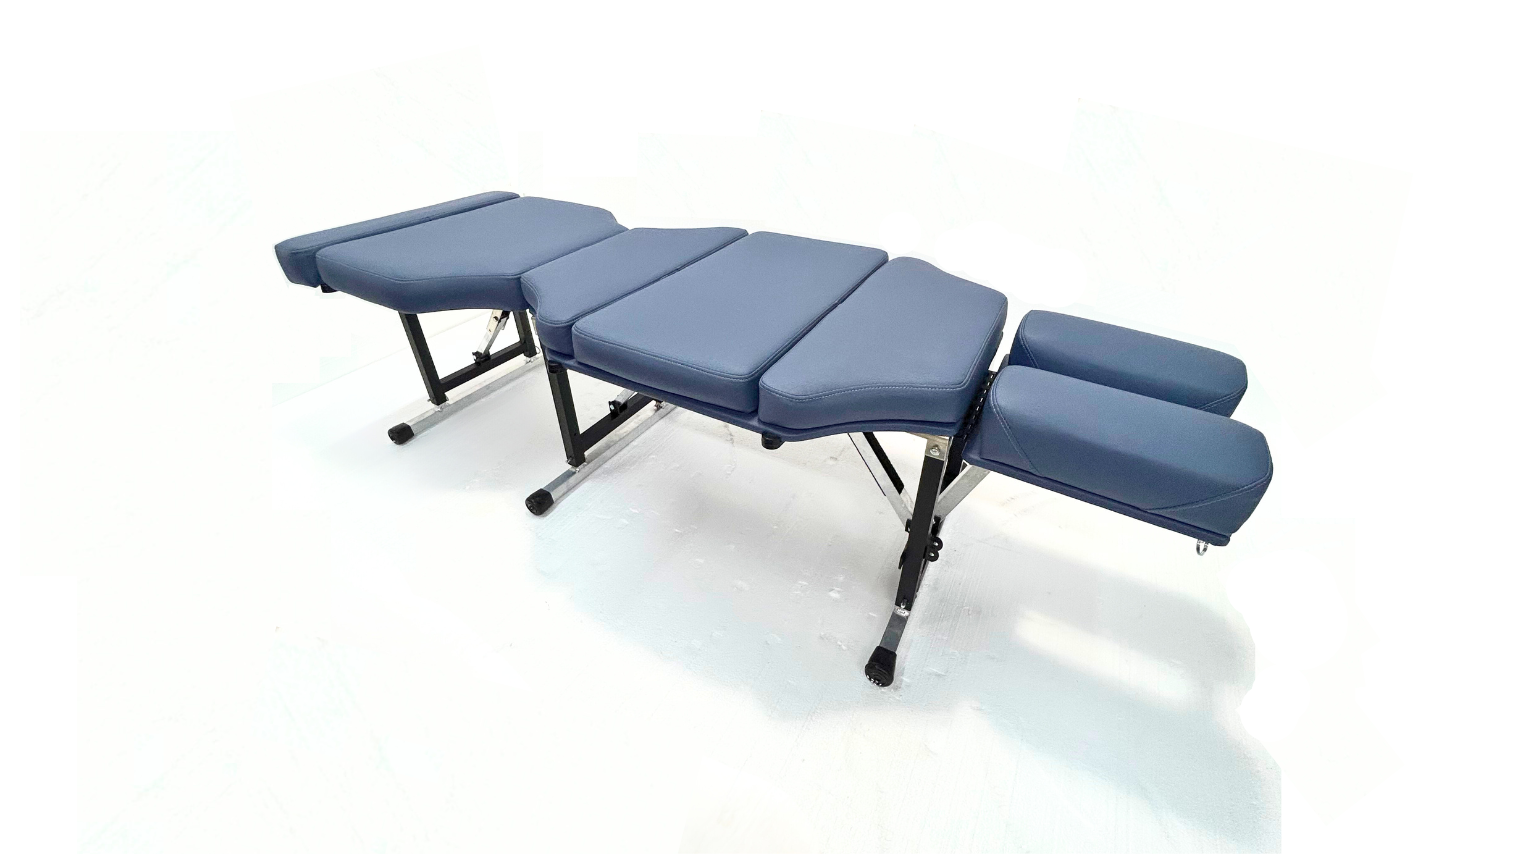 Blue Lifetimer International Ultim-Lite Portable Ergonomic Chiropractic drop adjustment therapy table airline travel friendly and also for massage, acupuncture and naturopath, physios and physical therapy 